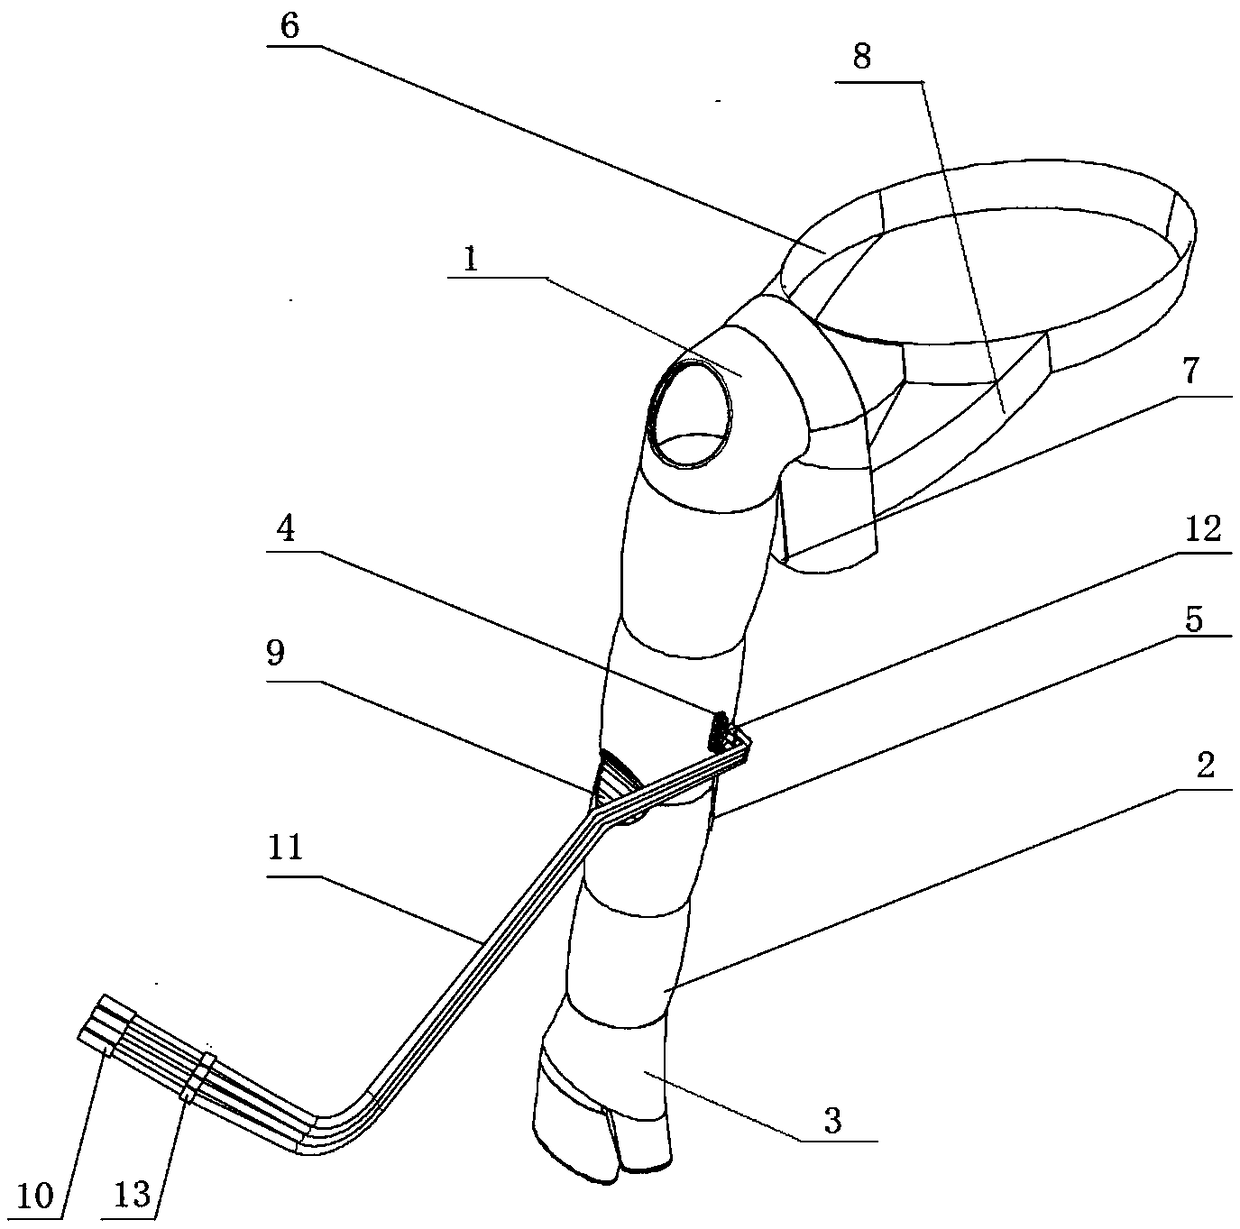 Wearable-type airbag device used for rehabilitation training and protection of upper limbs